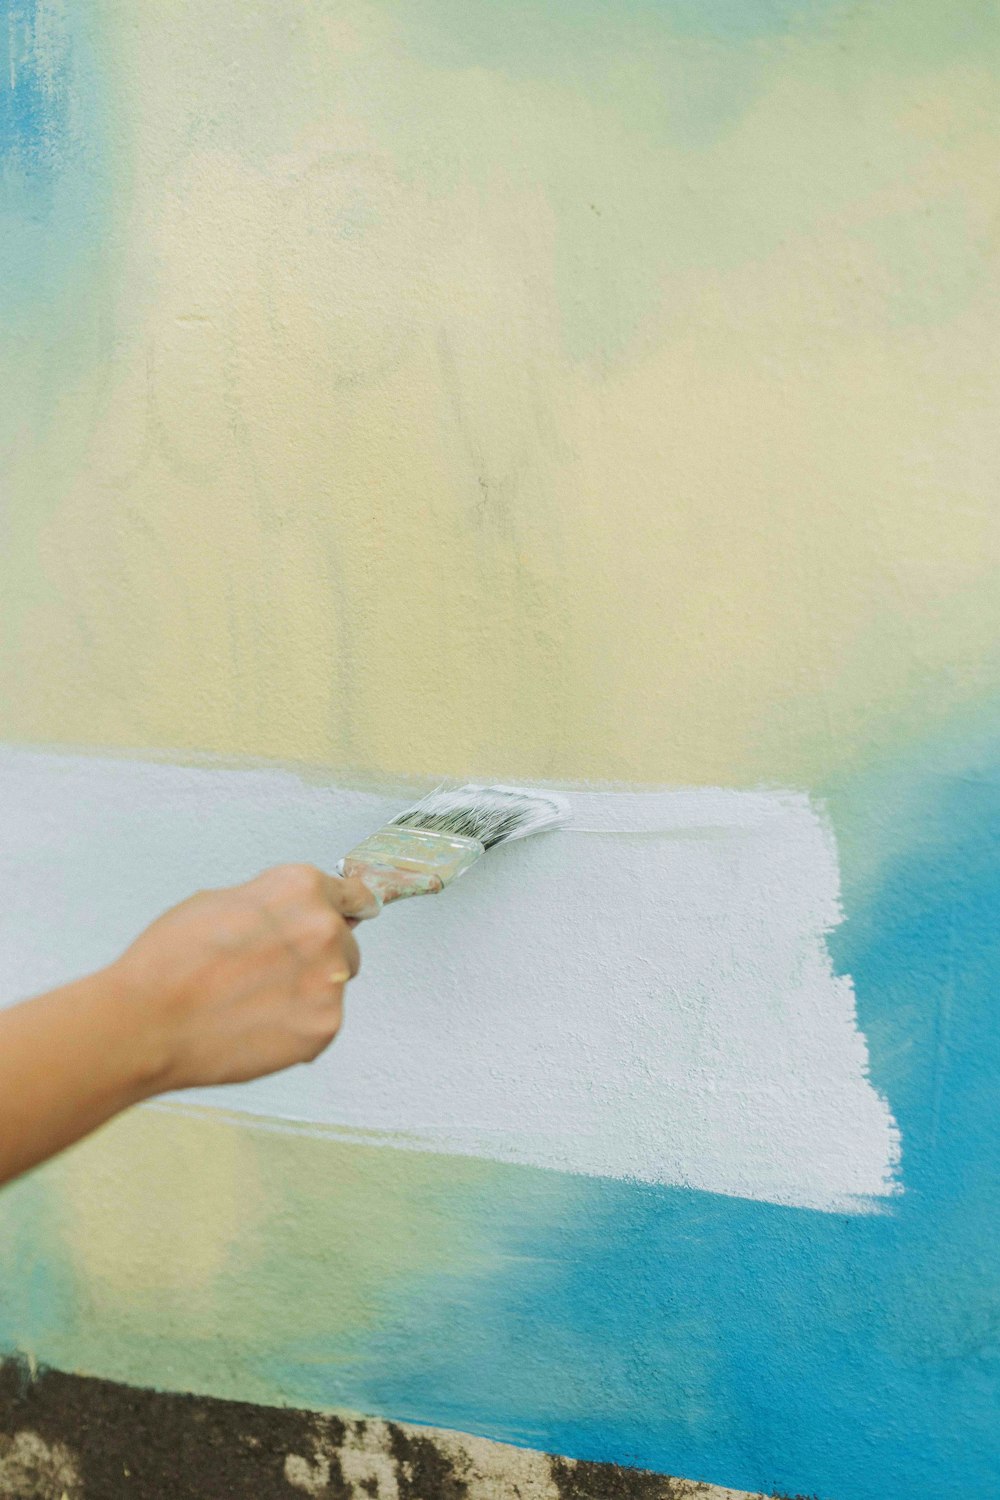 a person painting a wall with a paint roller